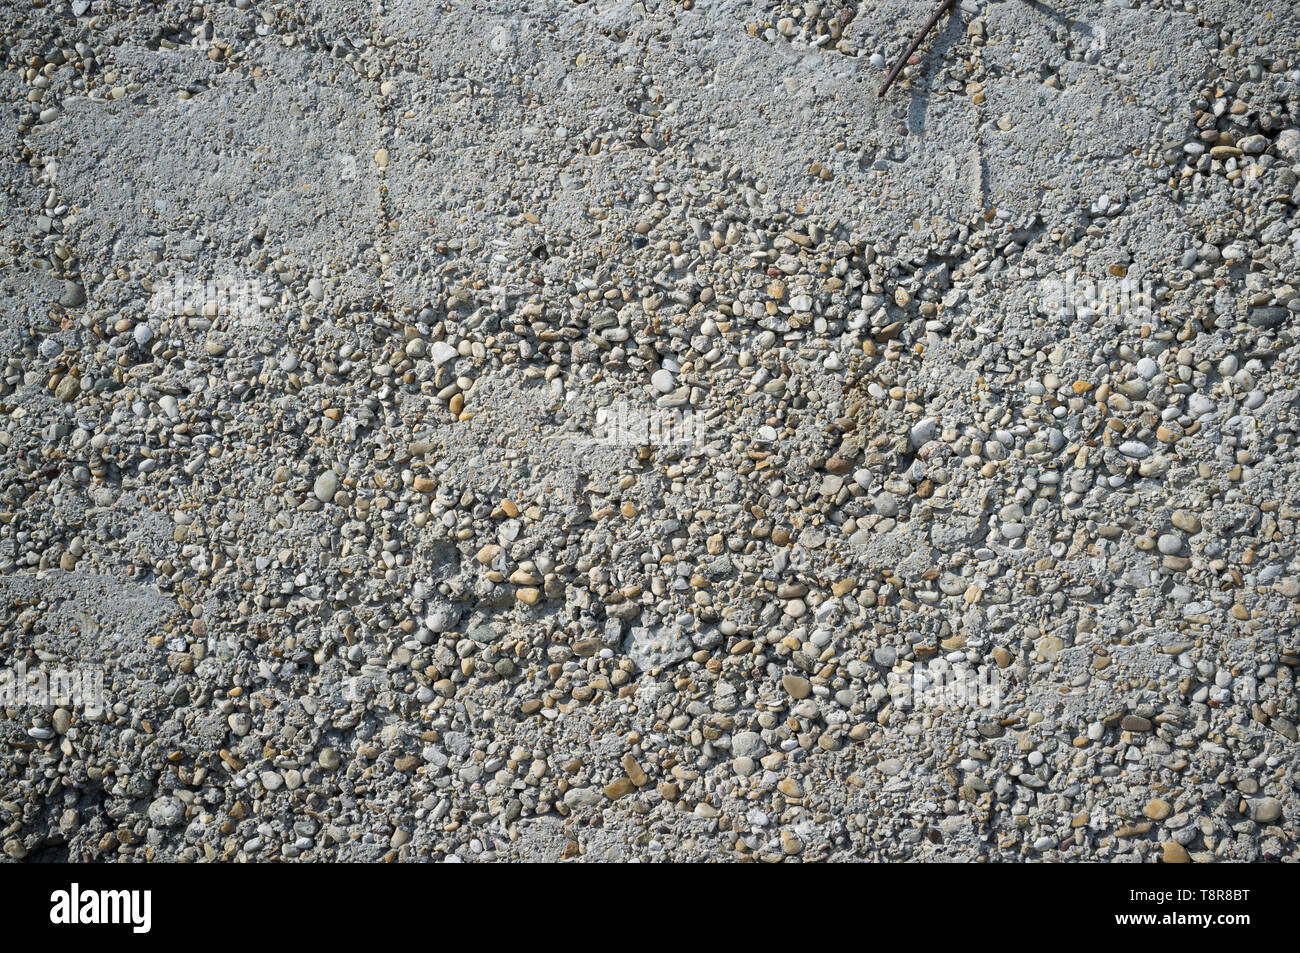 Crumbly Roughly Done Weathered Grey Concrete Wall with Pebbles Texture Detail Stock Photo